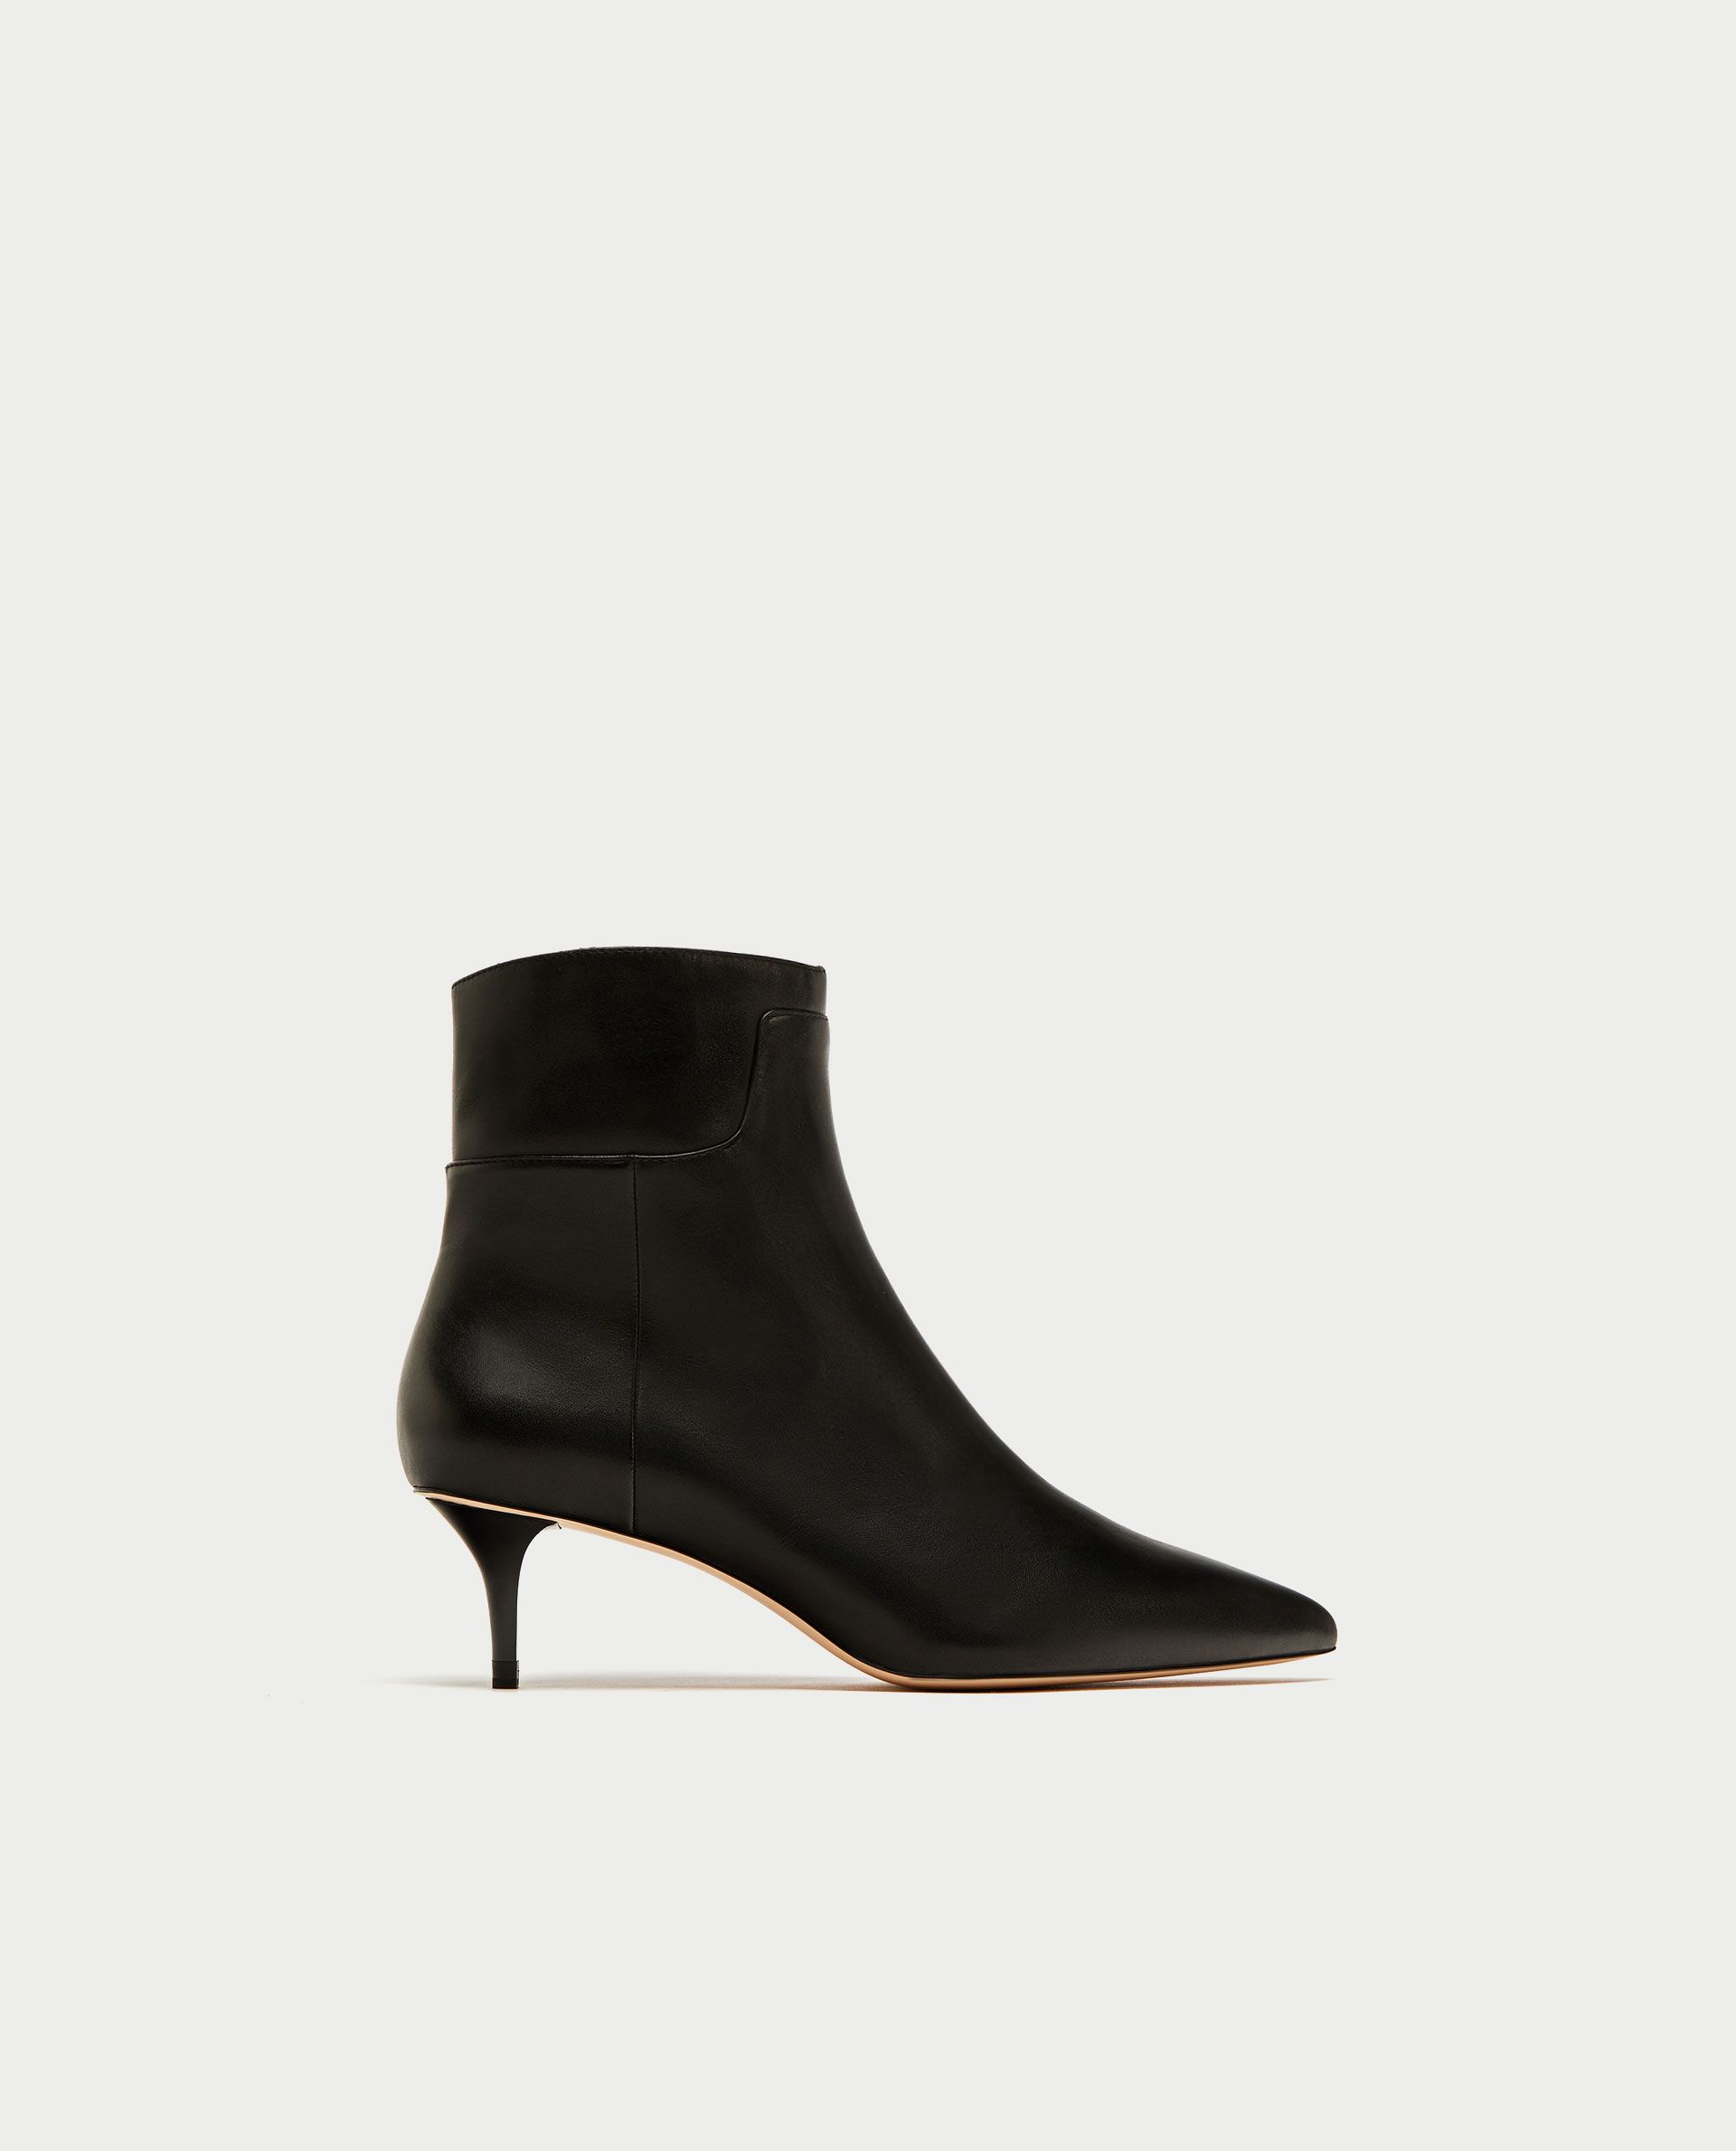 kitten heel booties are the shoes i’ve been desperately waiting for